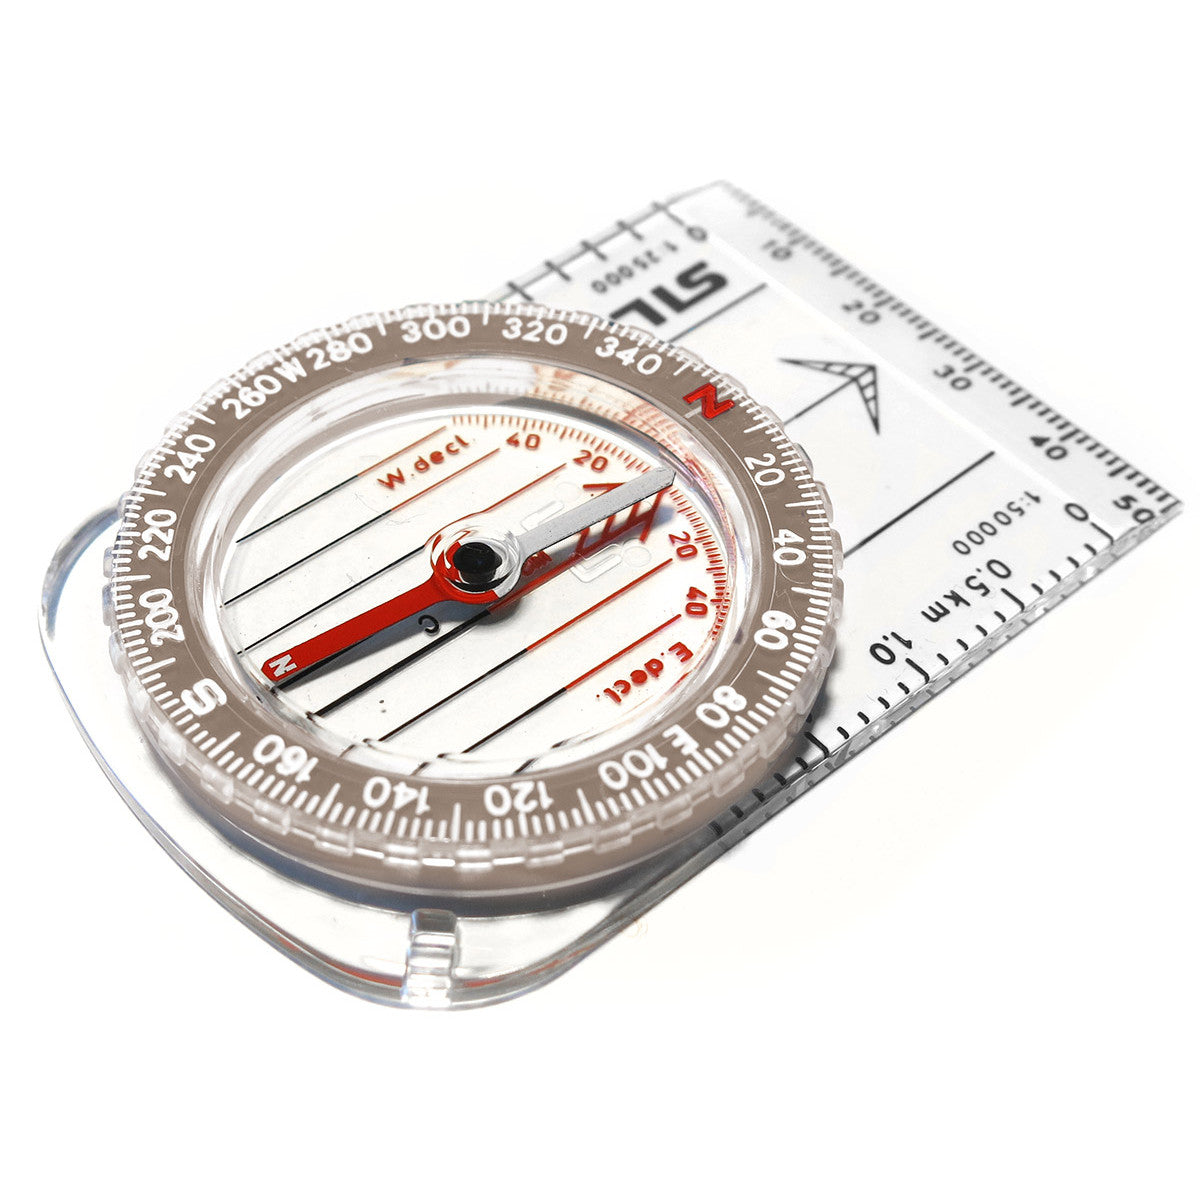 Silva Classic Compass, shown laid flat made from clear plastic material